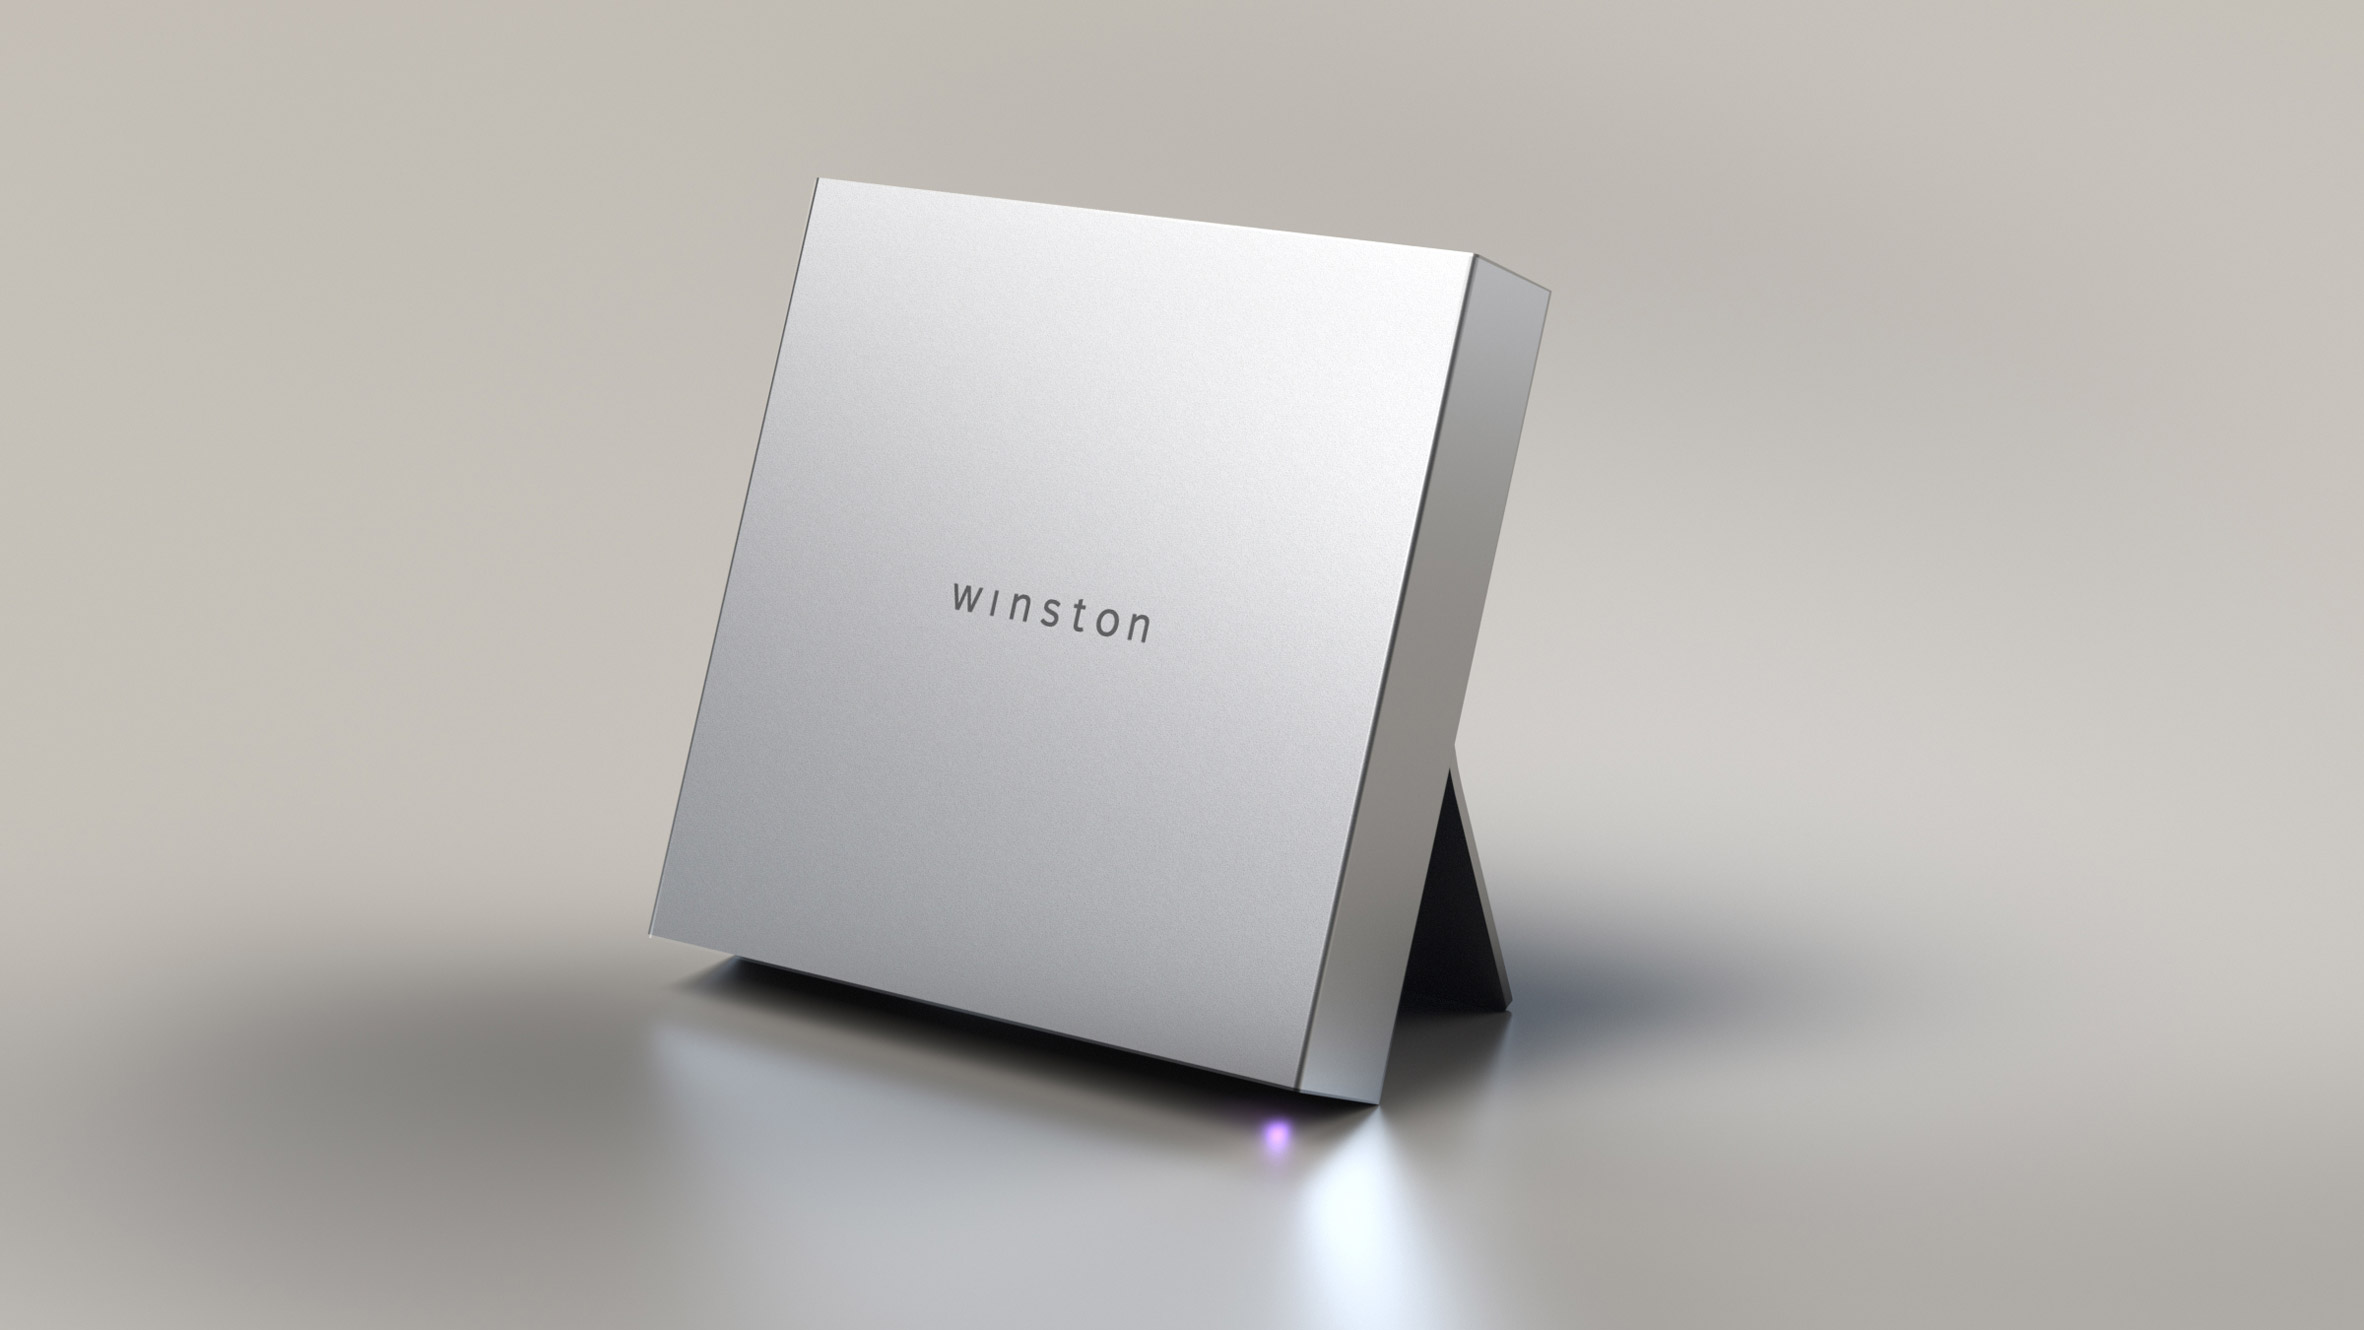 Wilson modem filter by Winston Privacy